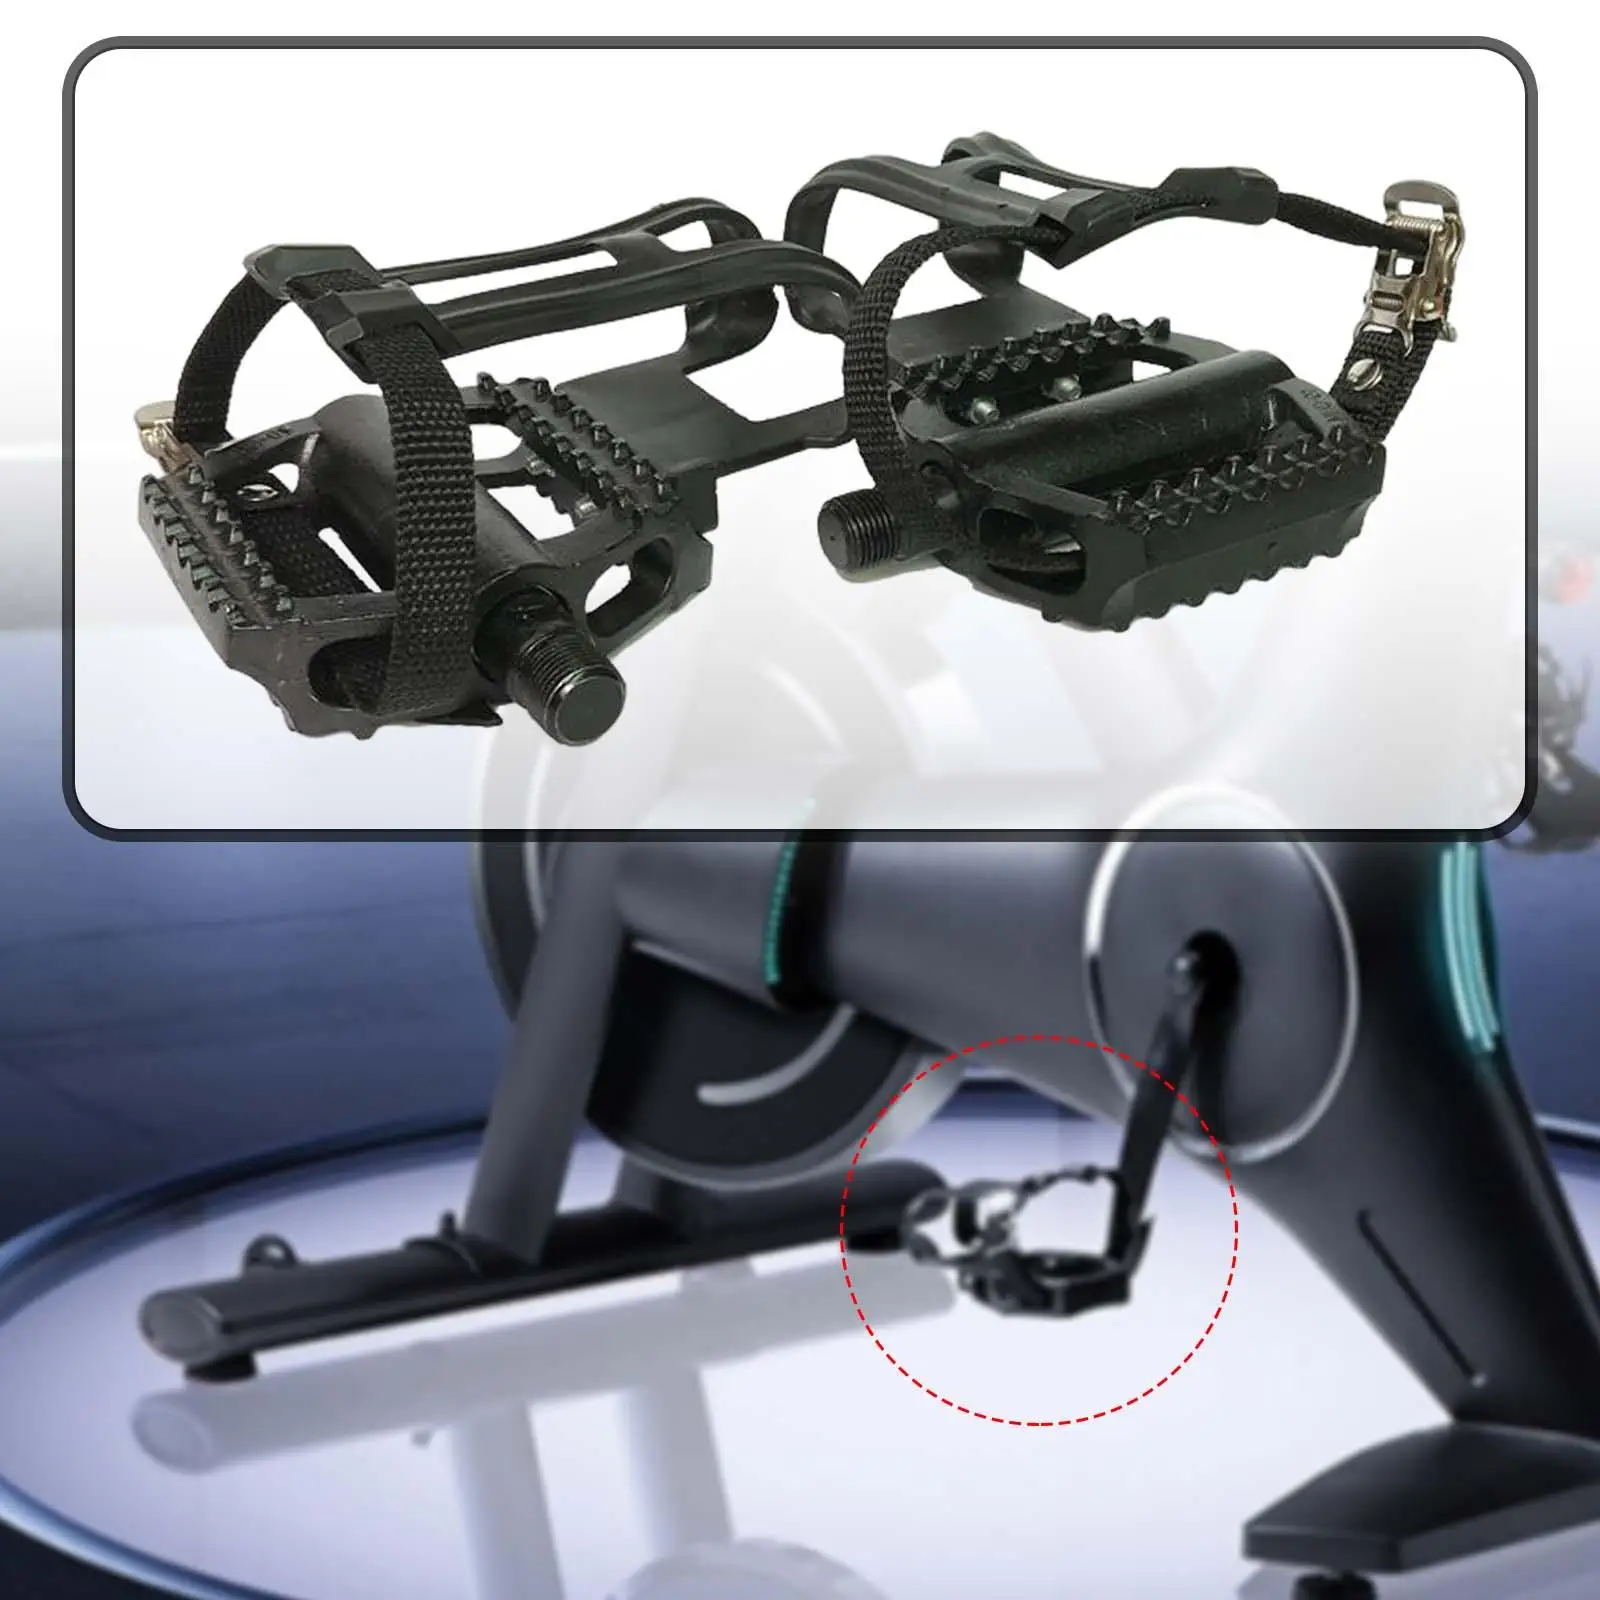 1 Pair Exercise Bike Pedals W/ Adjustable Straps 18mm Axle Platform Pedals Nonslip for Gym Cycling Indoor Parts Replacement